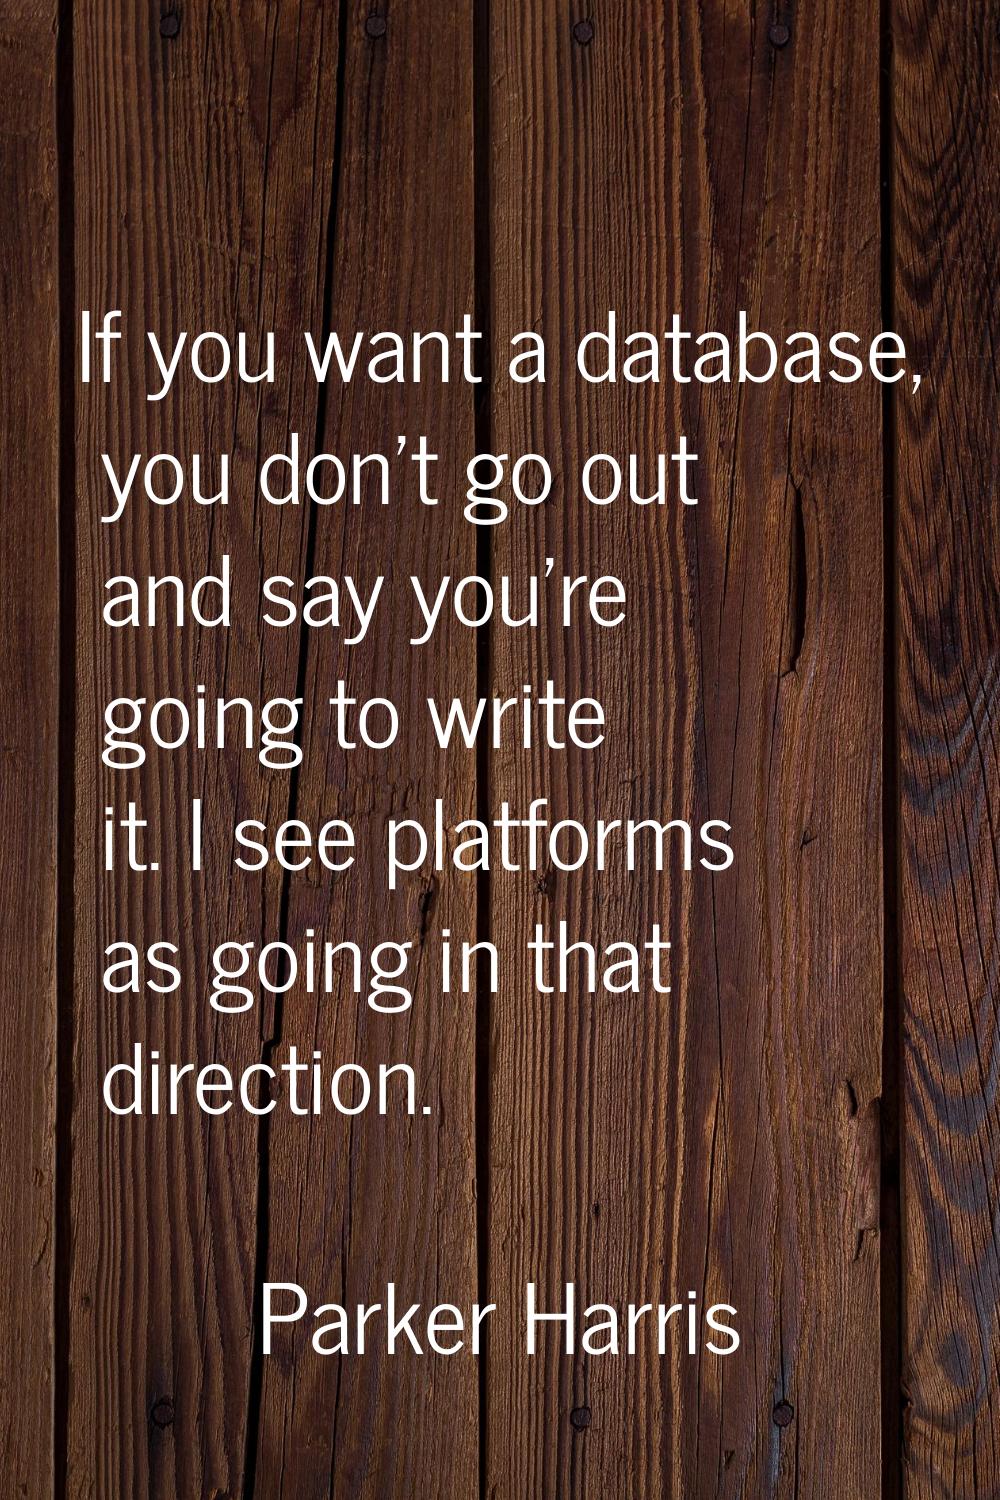 If you want a database, you don't go out and say you're going to write it. I see platforms as going